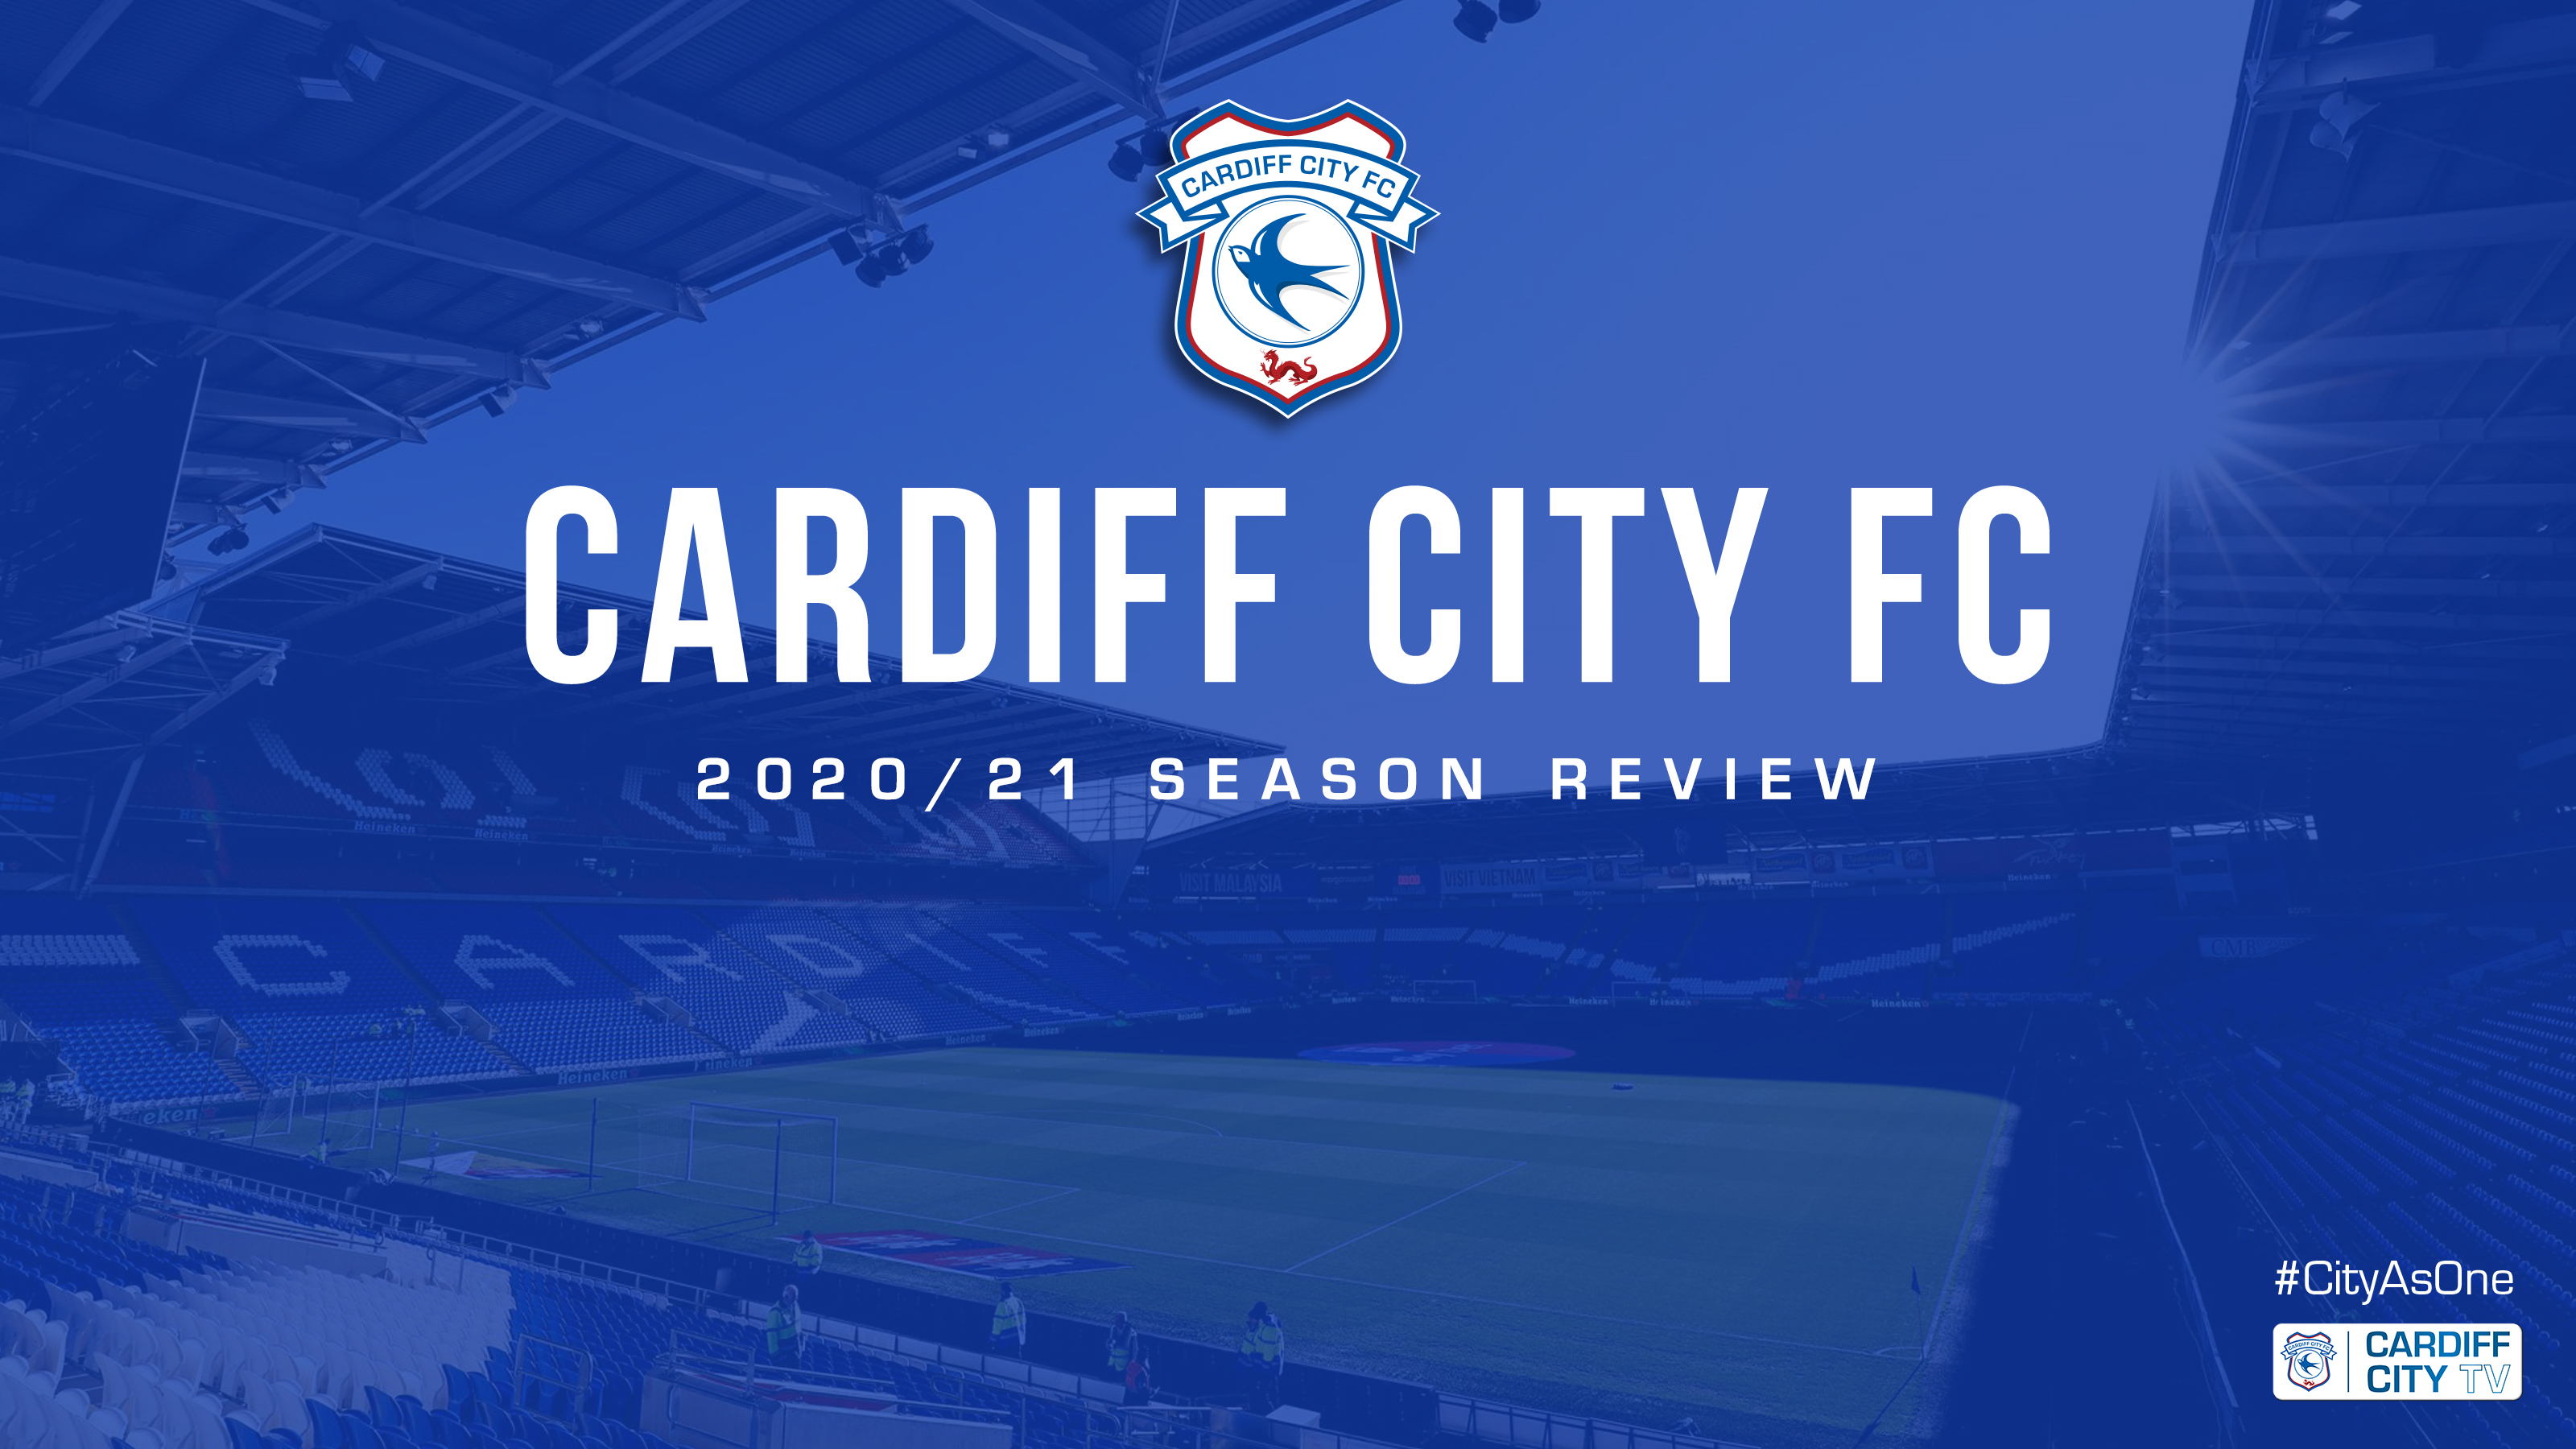 Cardiff City FC, Brands of the World™